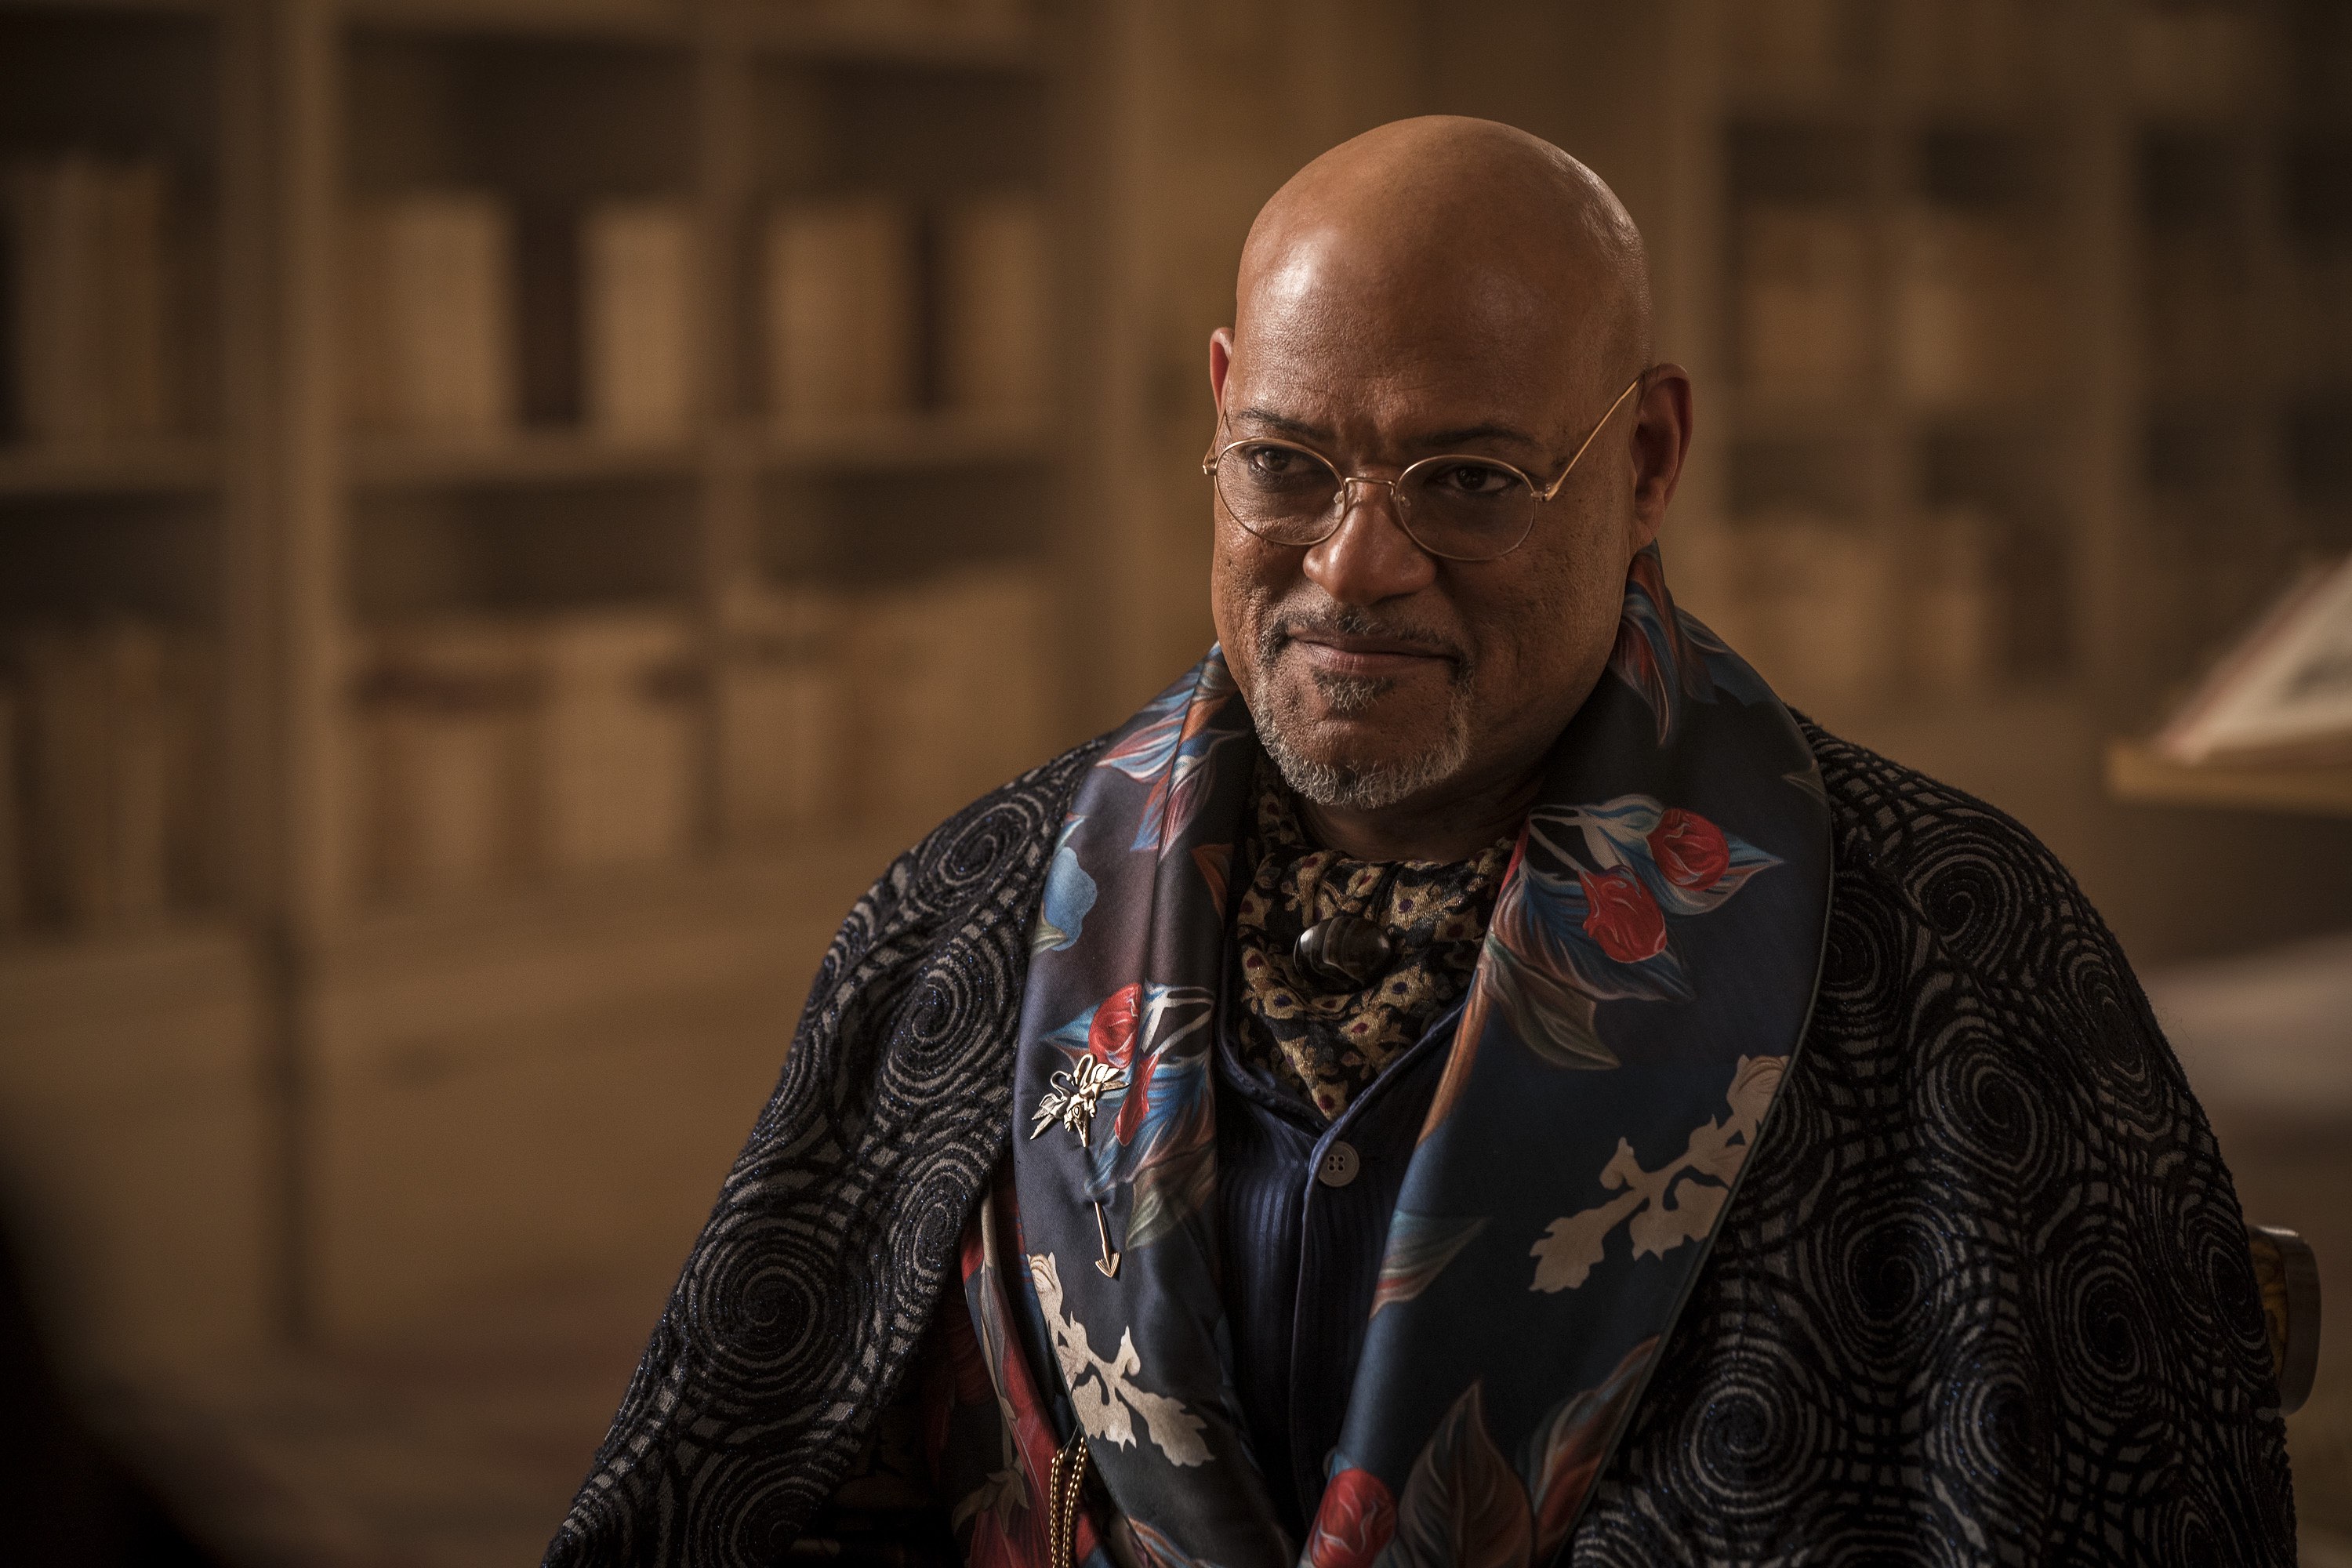 The School for Good and Evil Cast on Netflix - Laurence Fishburne as the School Master